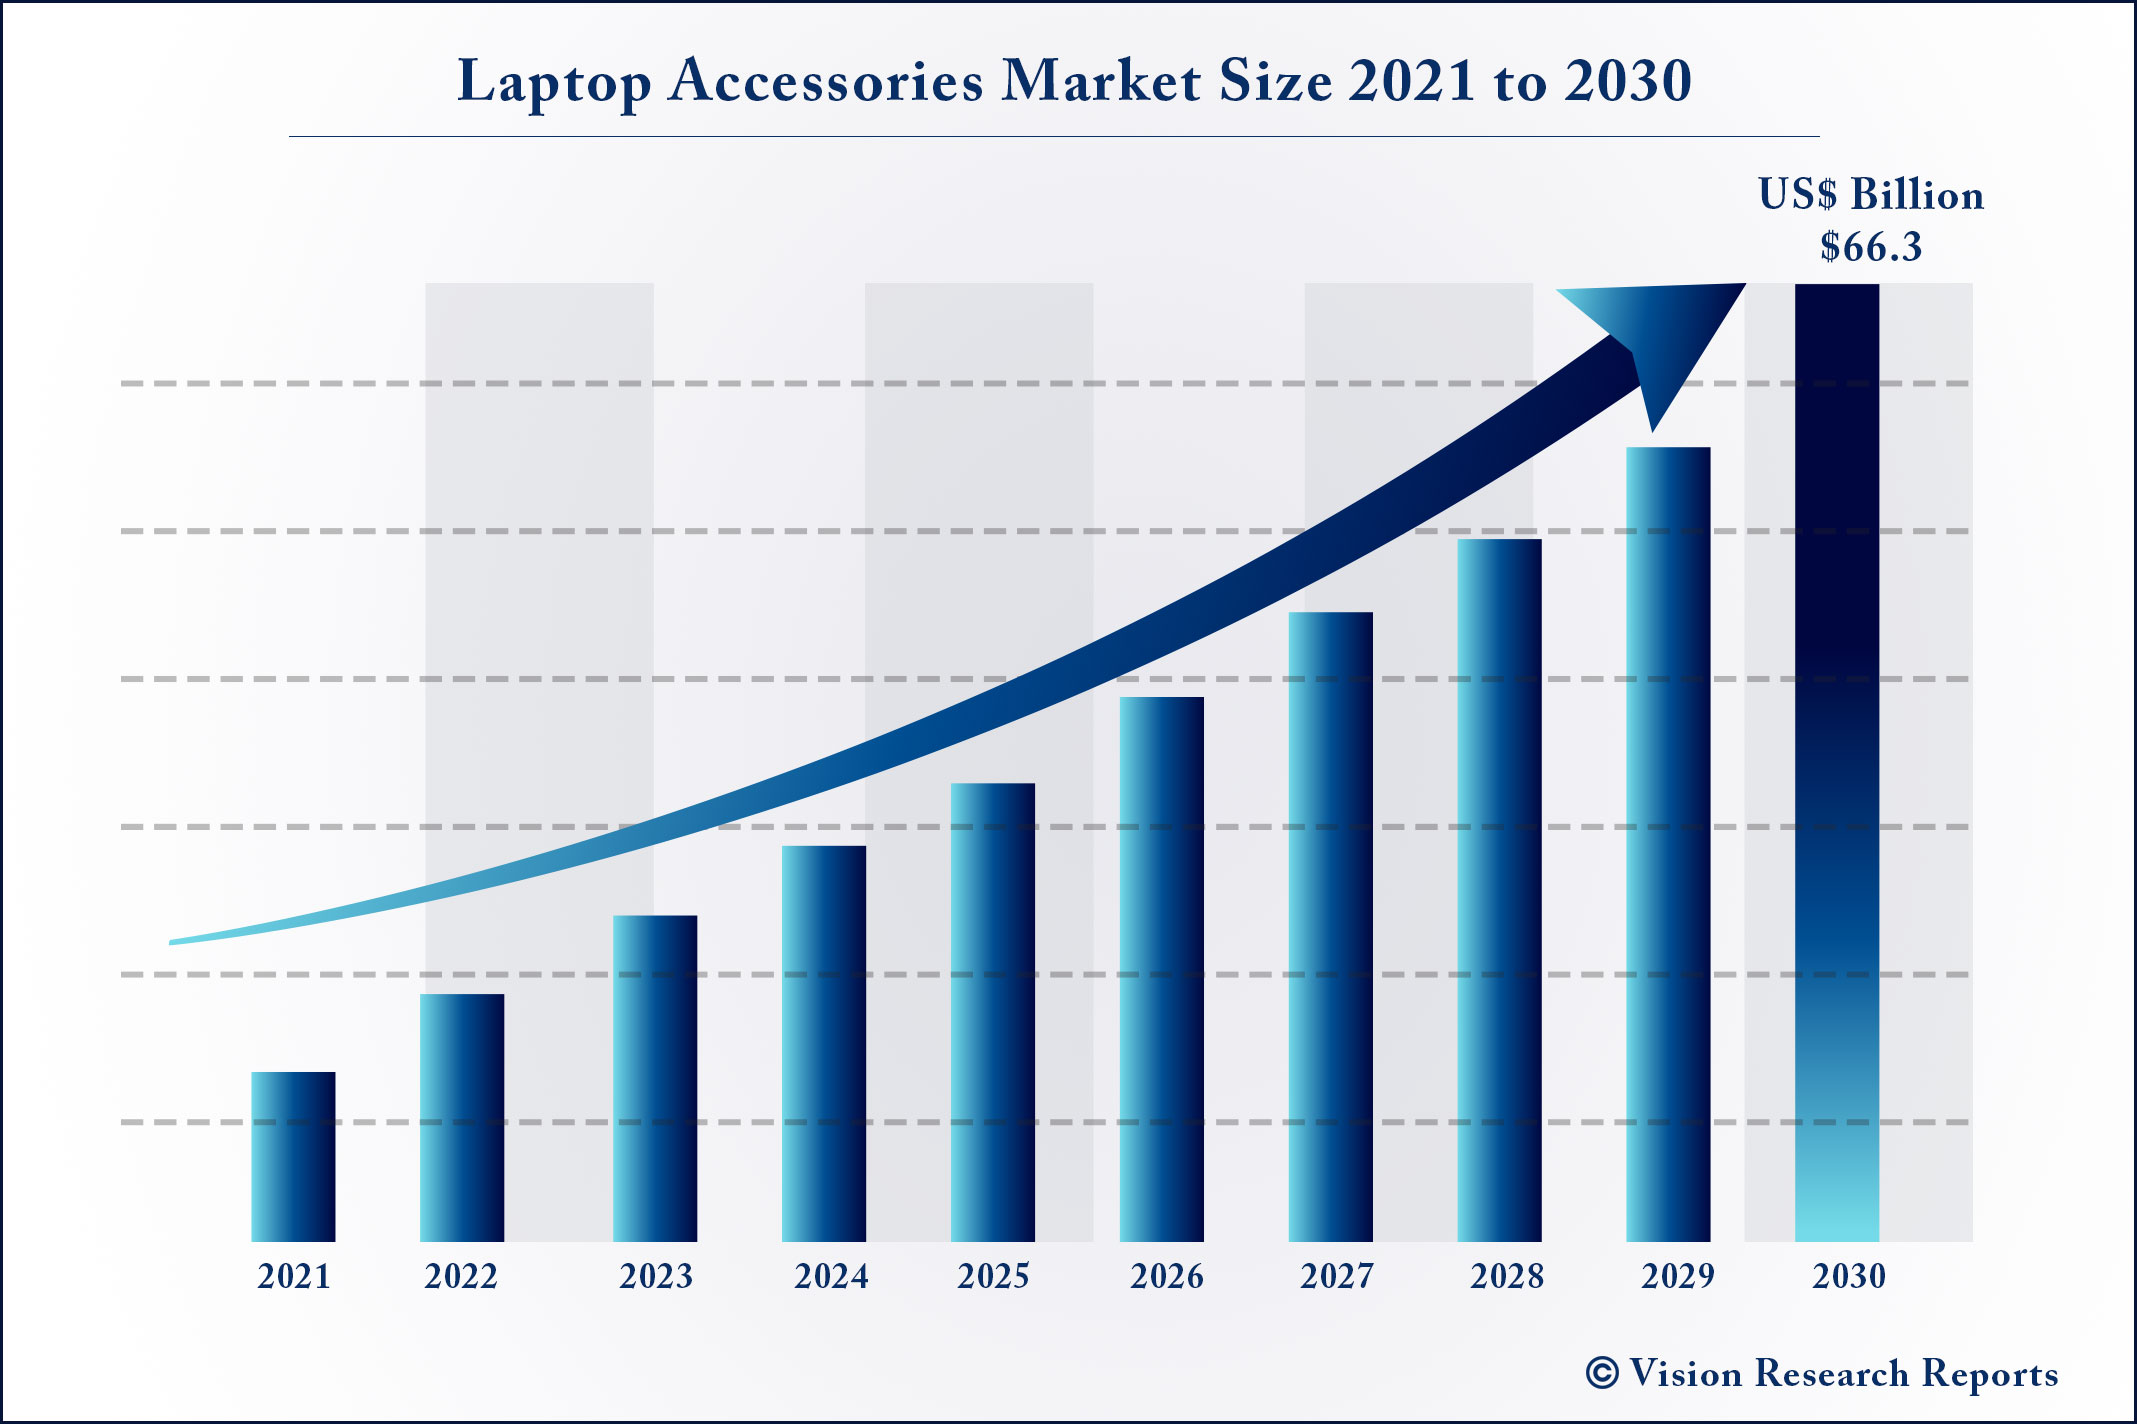 Laptop Accessories Market Size 2021 to 2030